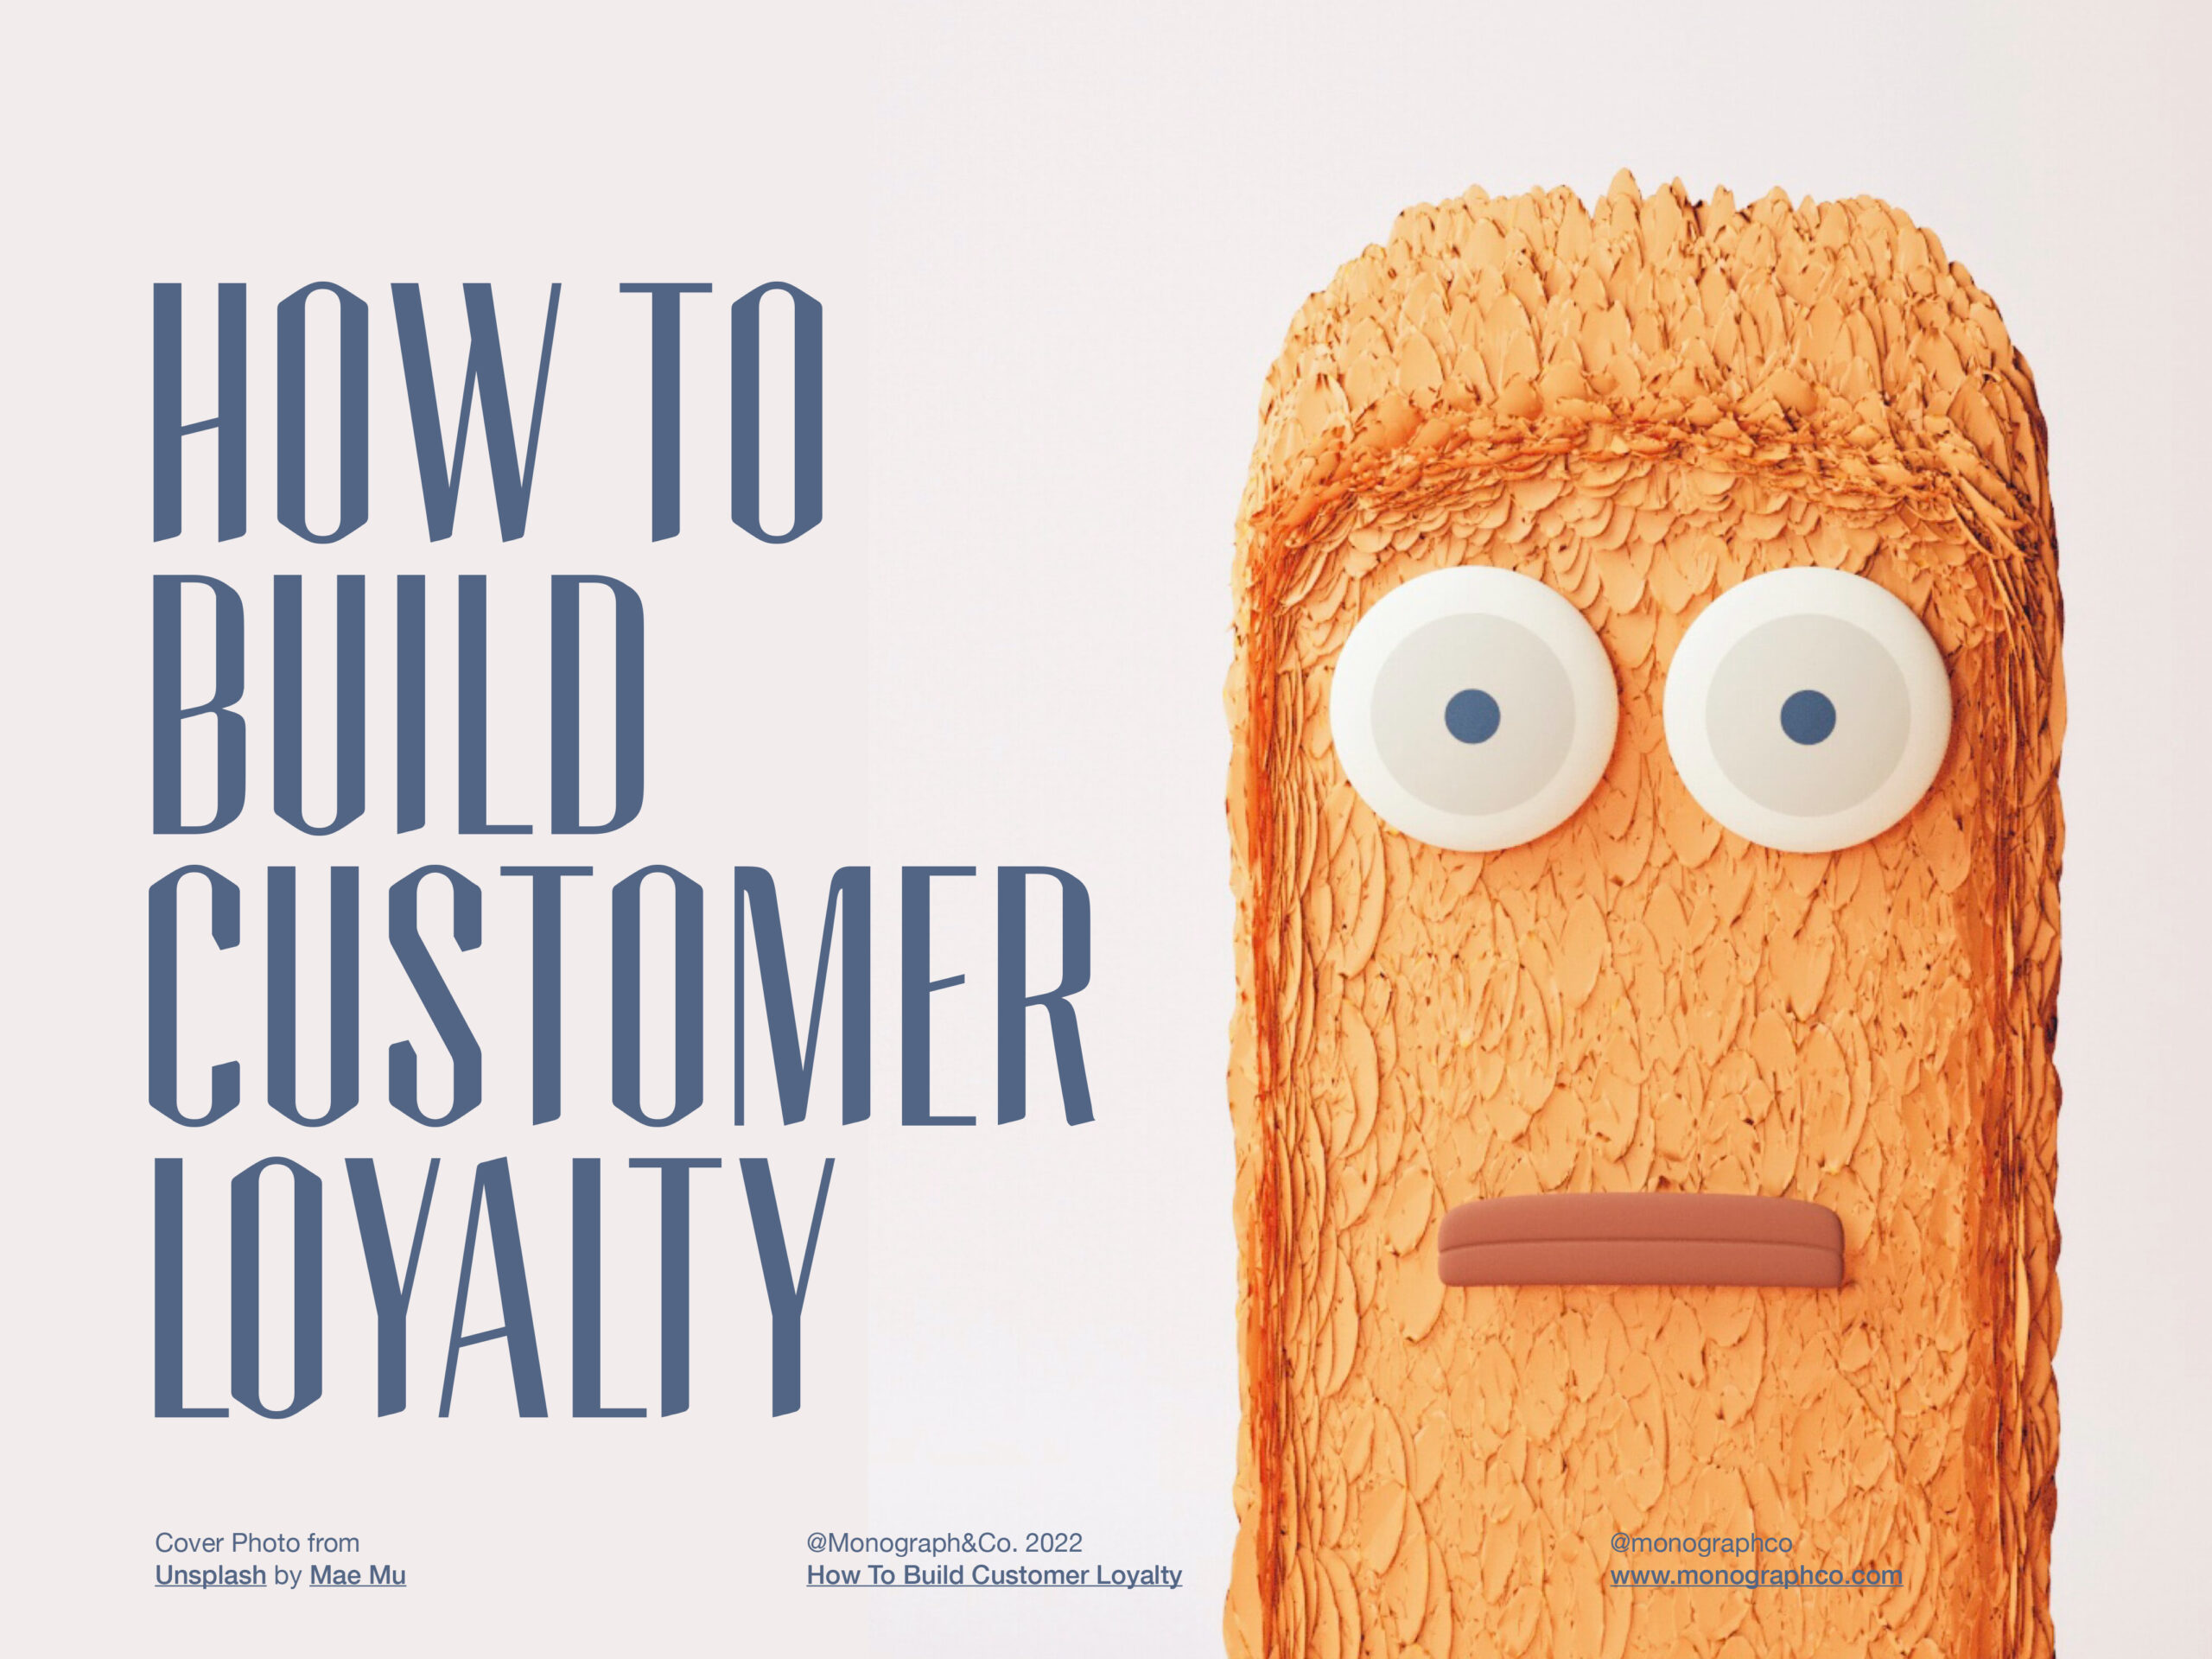 11How to build customer loyalty online